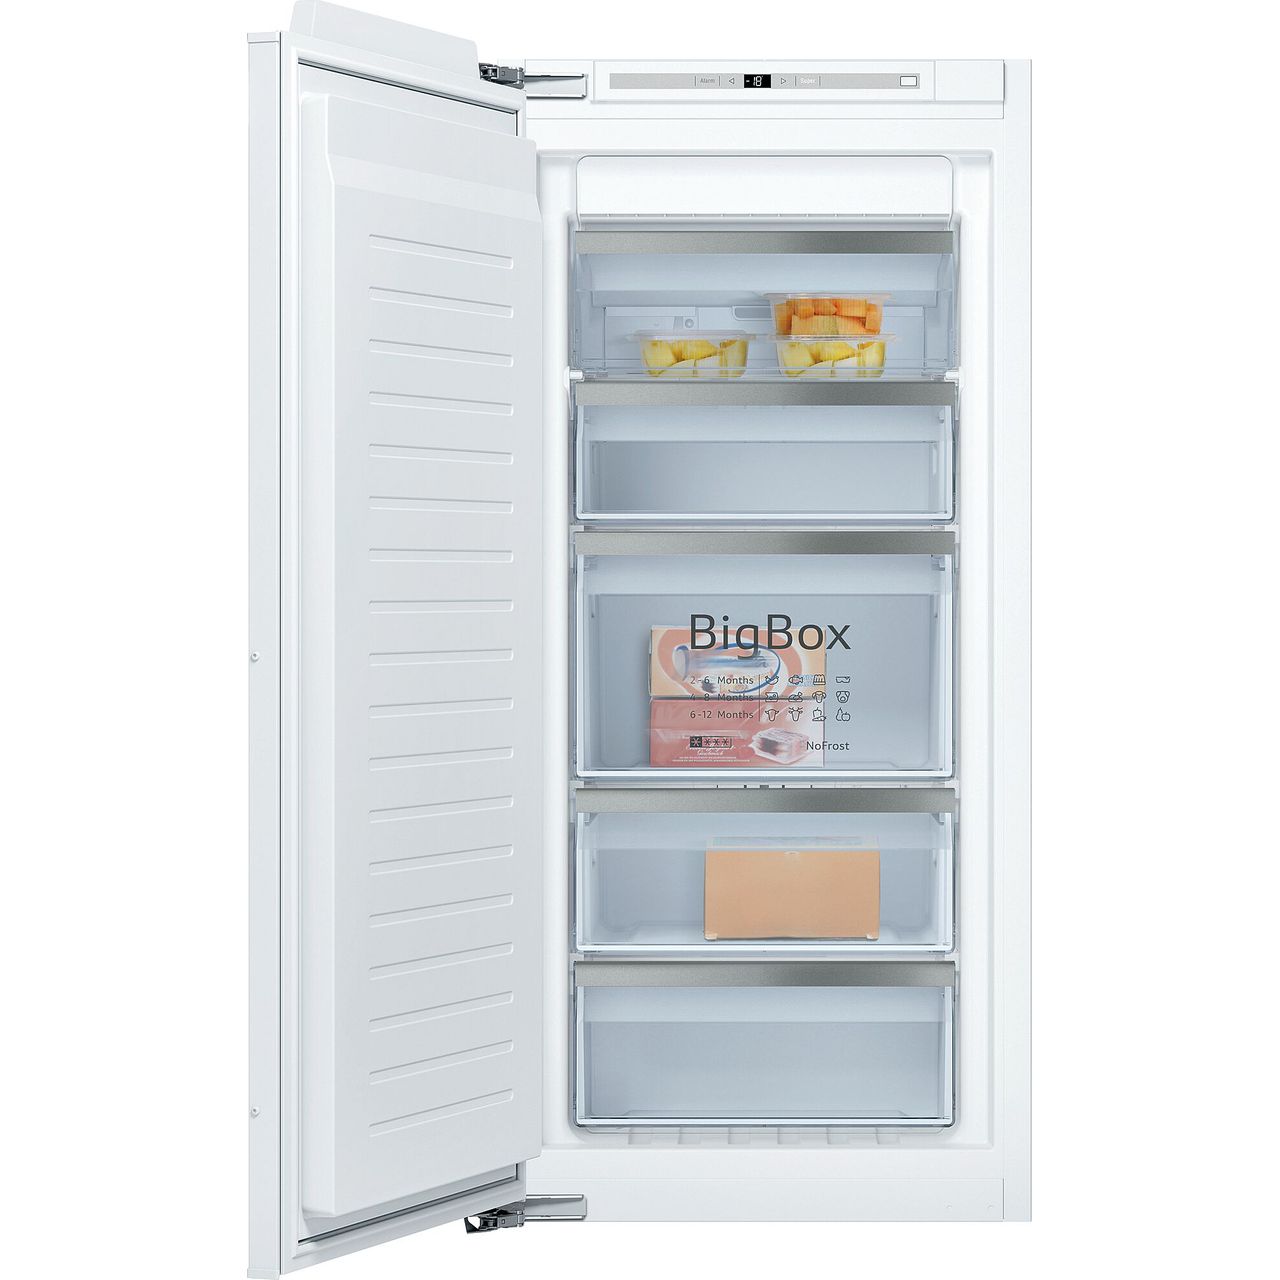 NEFF N70 GI7416CE0 Integrated Frost Free Upright Freezer with Fixed Door Fixing Kit Review